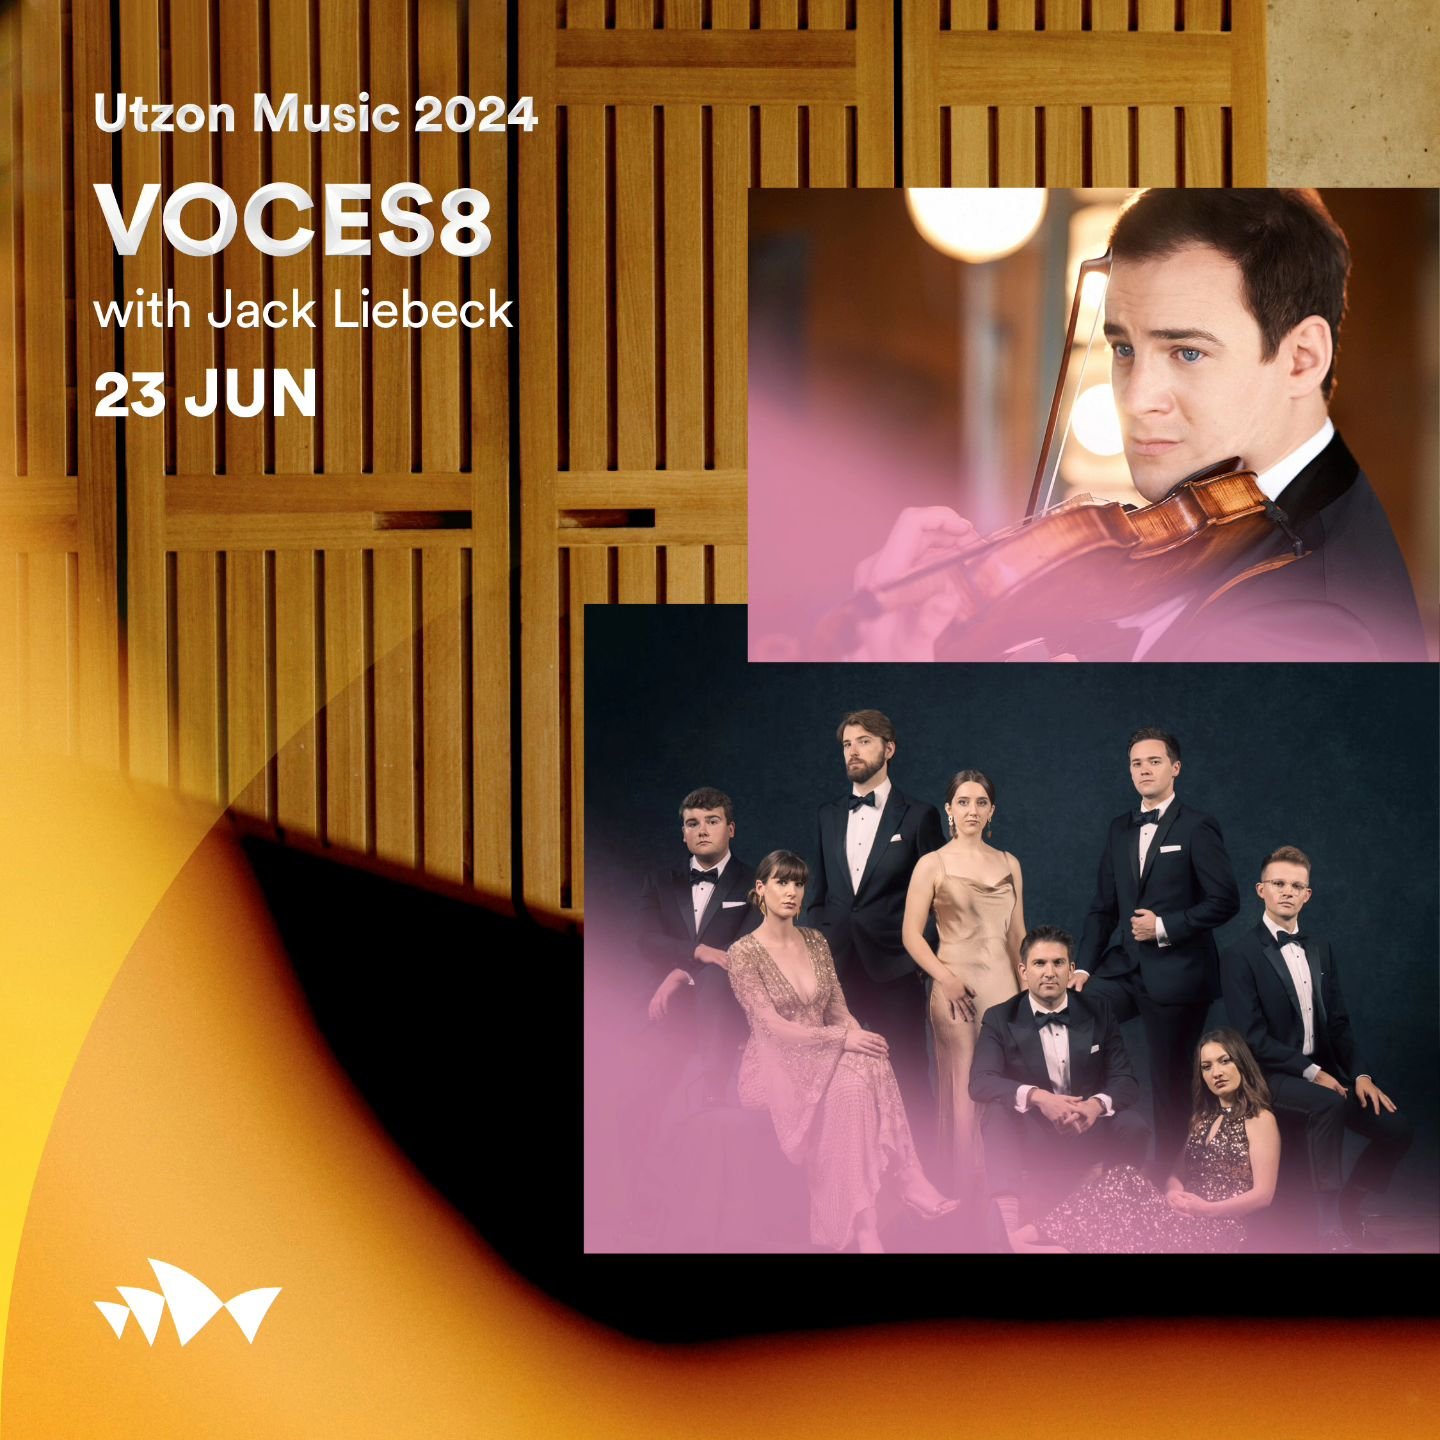 Two months to go! @sydneyoperahouse's Utzon Music Series 2024 with the phenomenal @voces8! The concert will take place on 23 June 2024 in the iconic main concert hall.

Tickets and information available here: https://www.sydneyoperahouse.com/classica